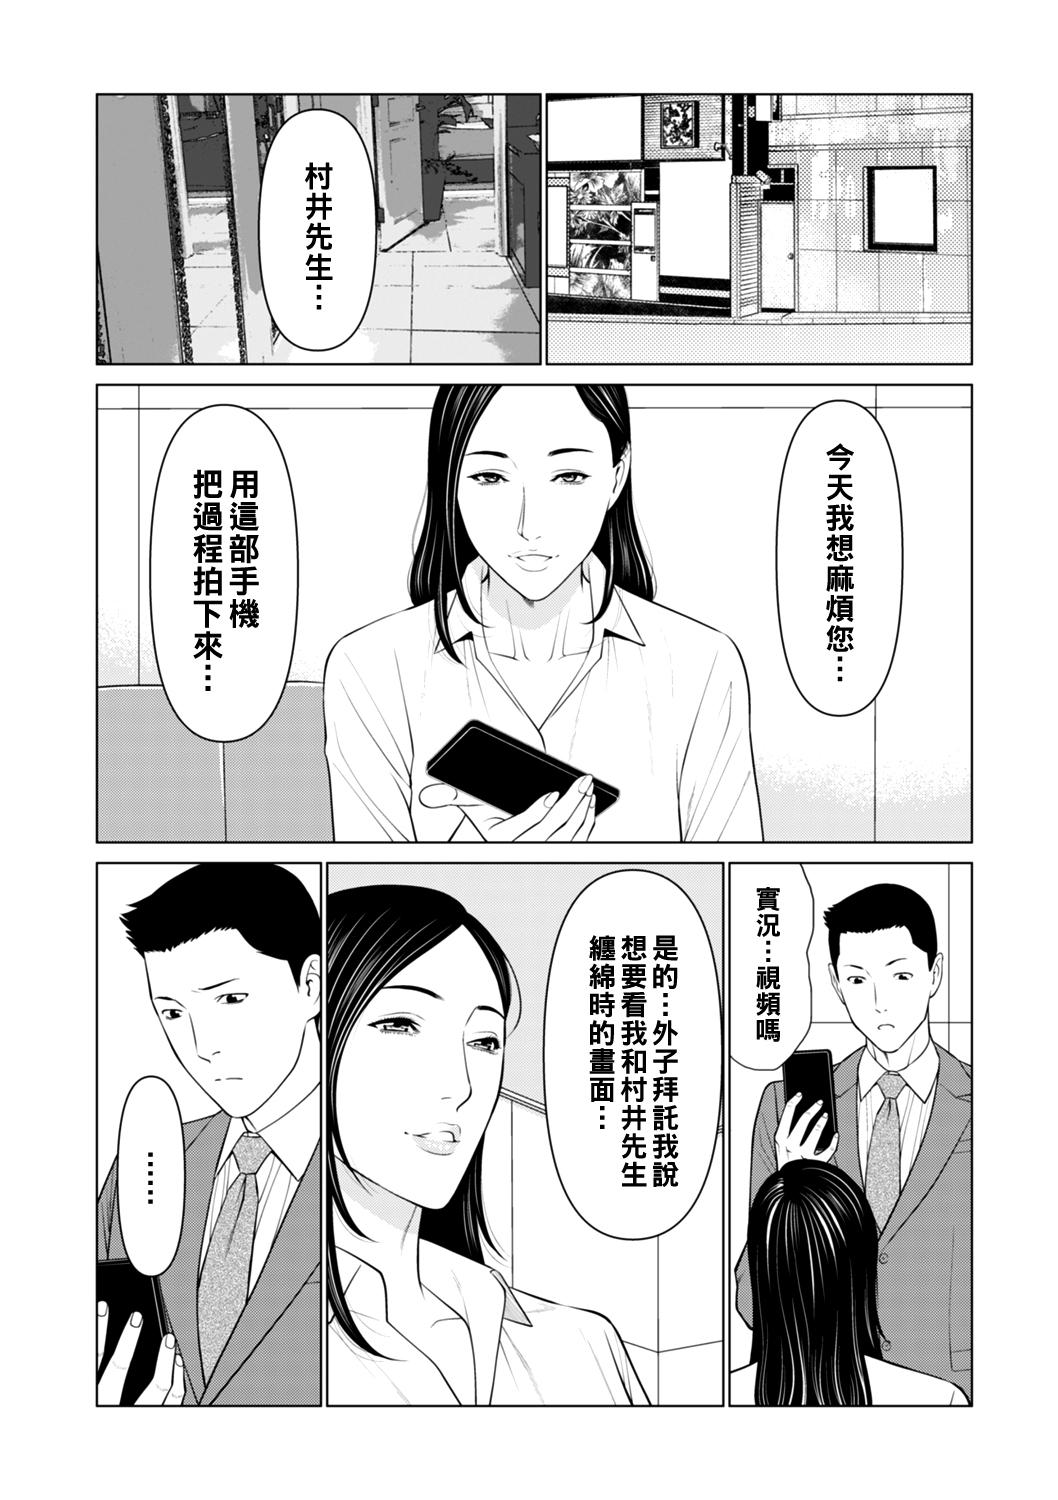 Point Of View 誘い 第二話（Chinese） Gaydudes - Page 2